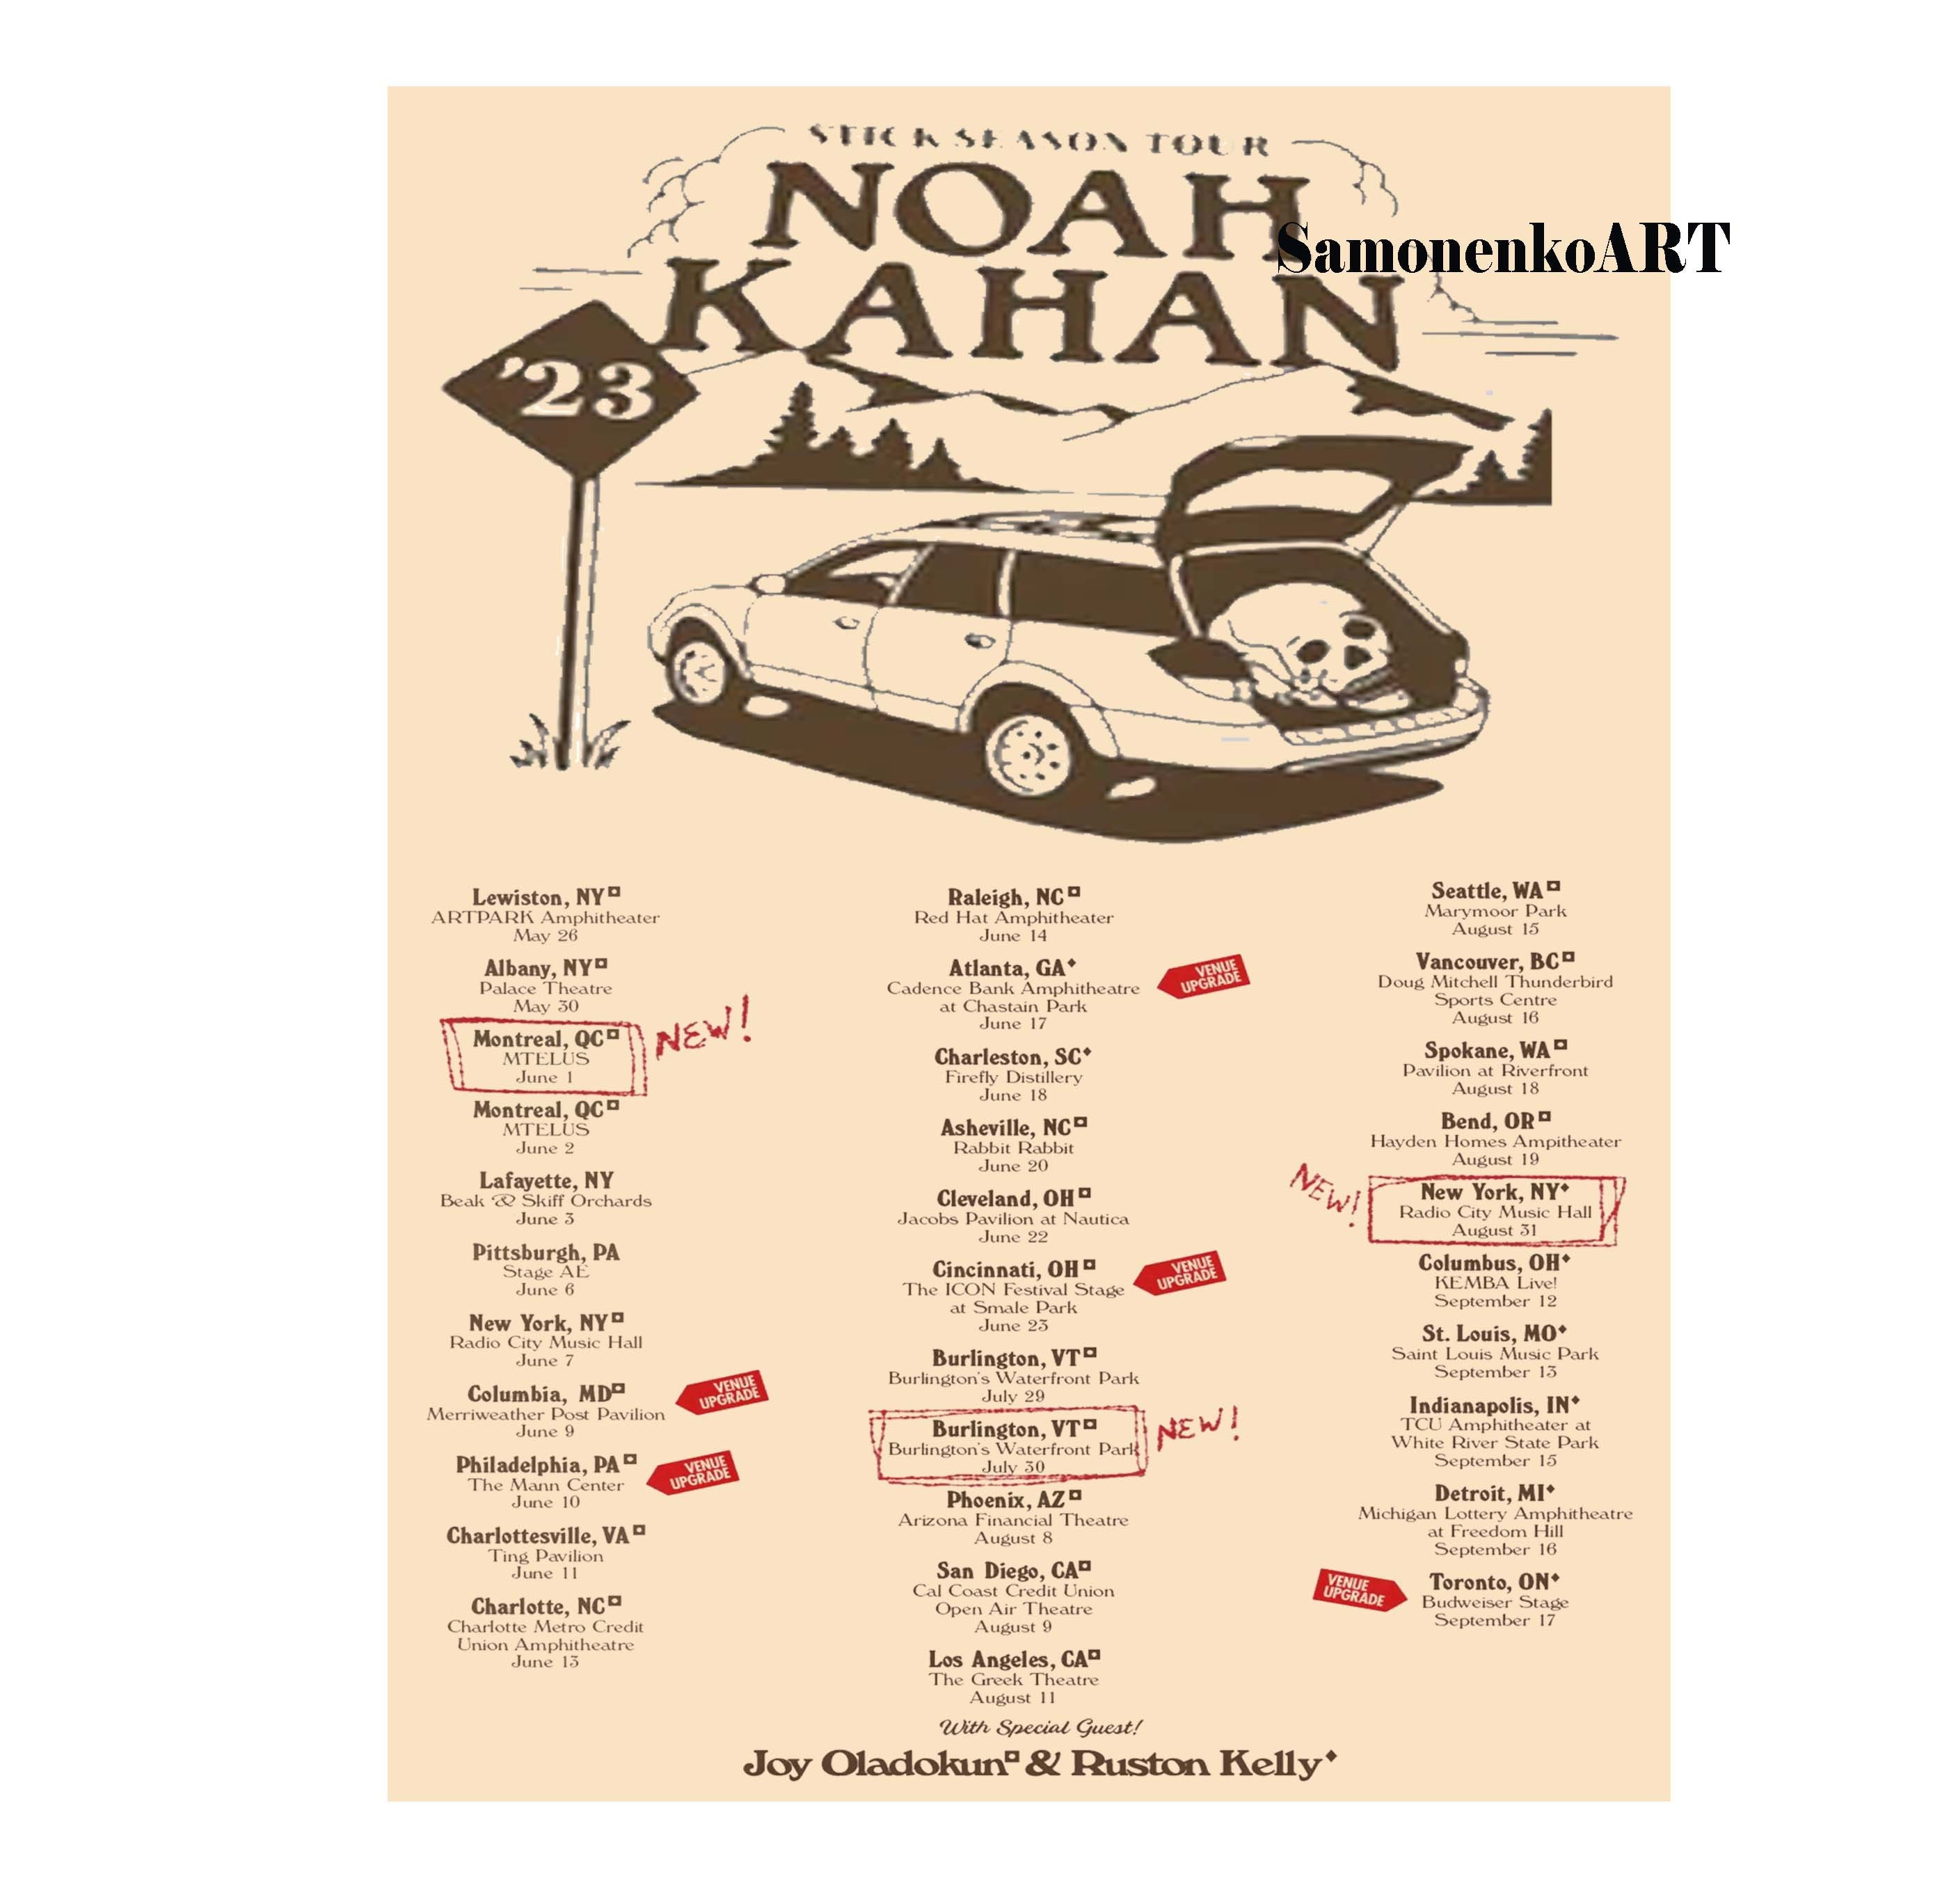 Noah Kahan's 'We'll All Be Here Forever Tour' Set For March 